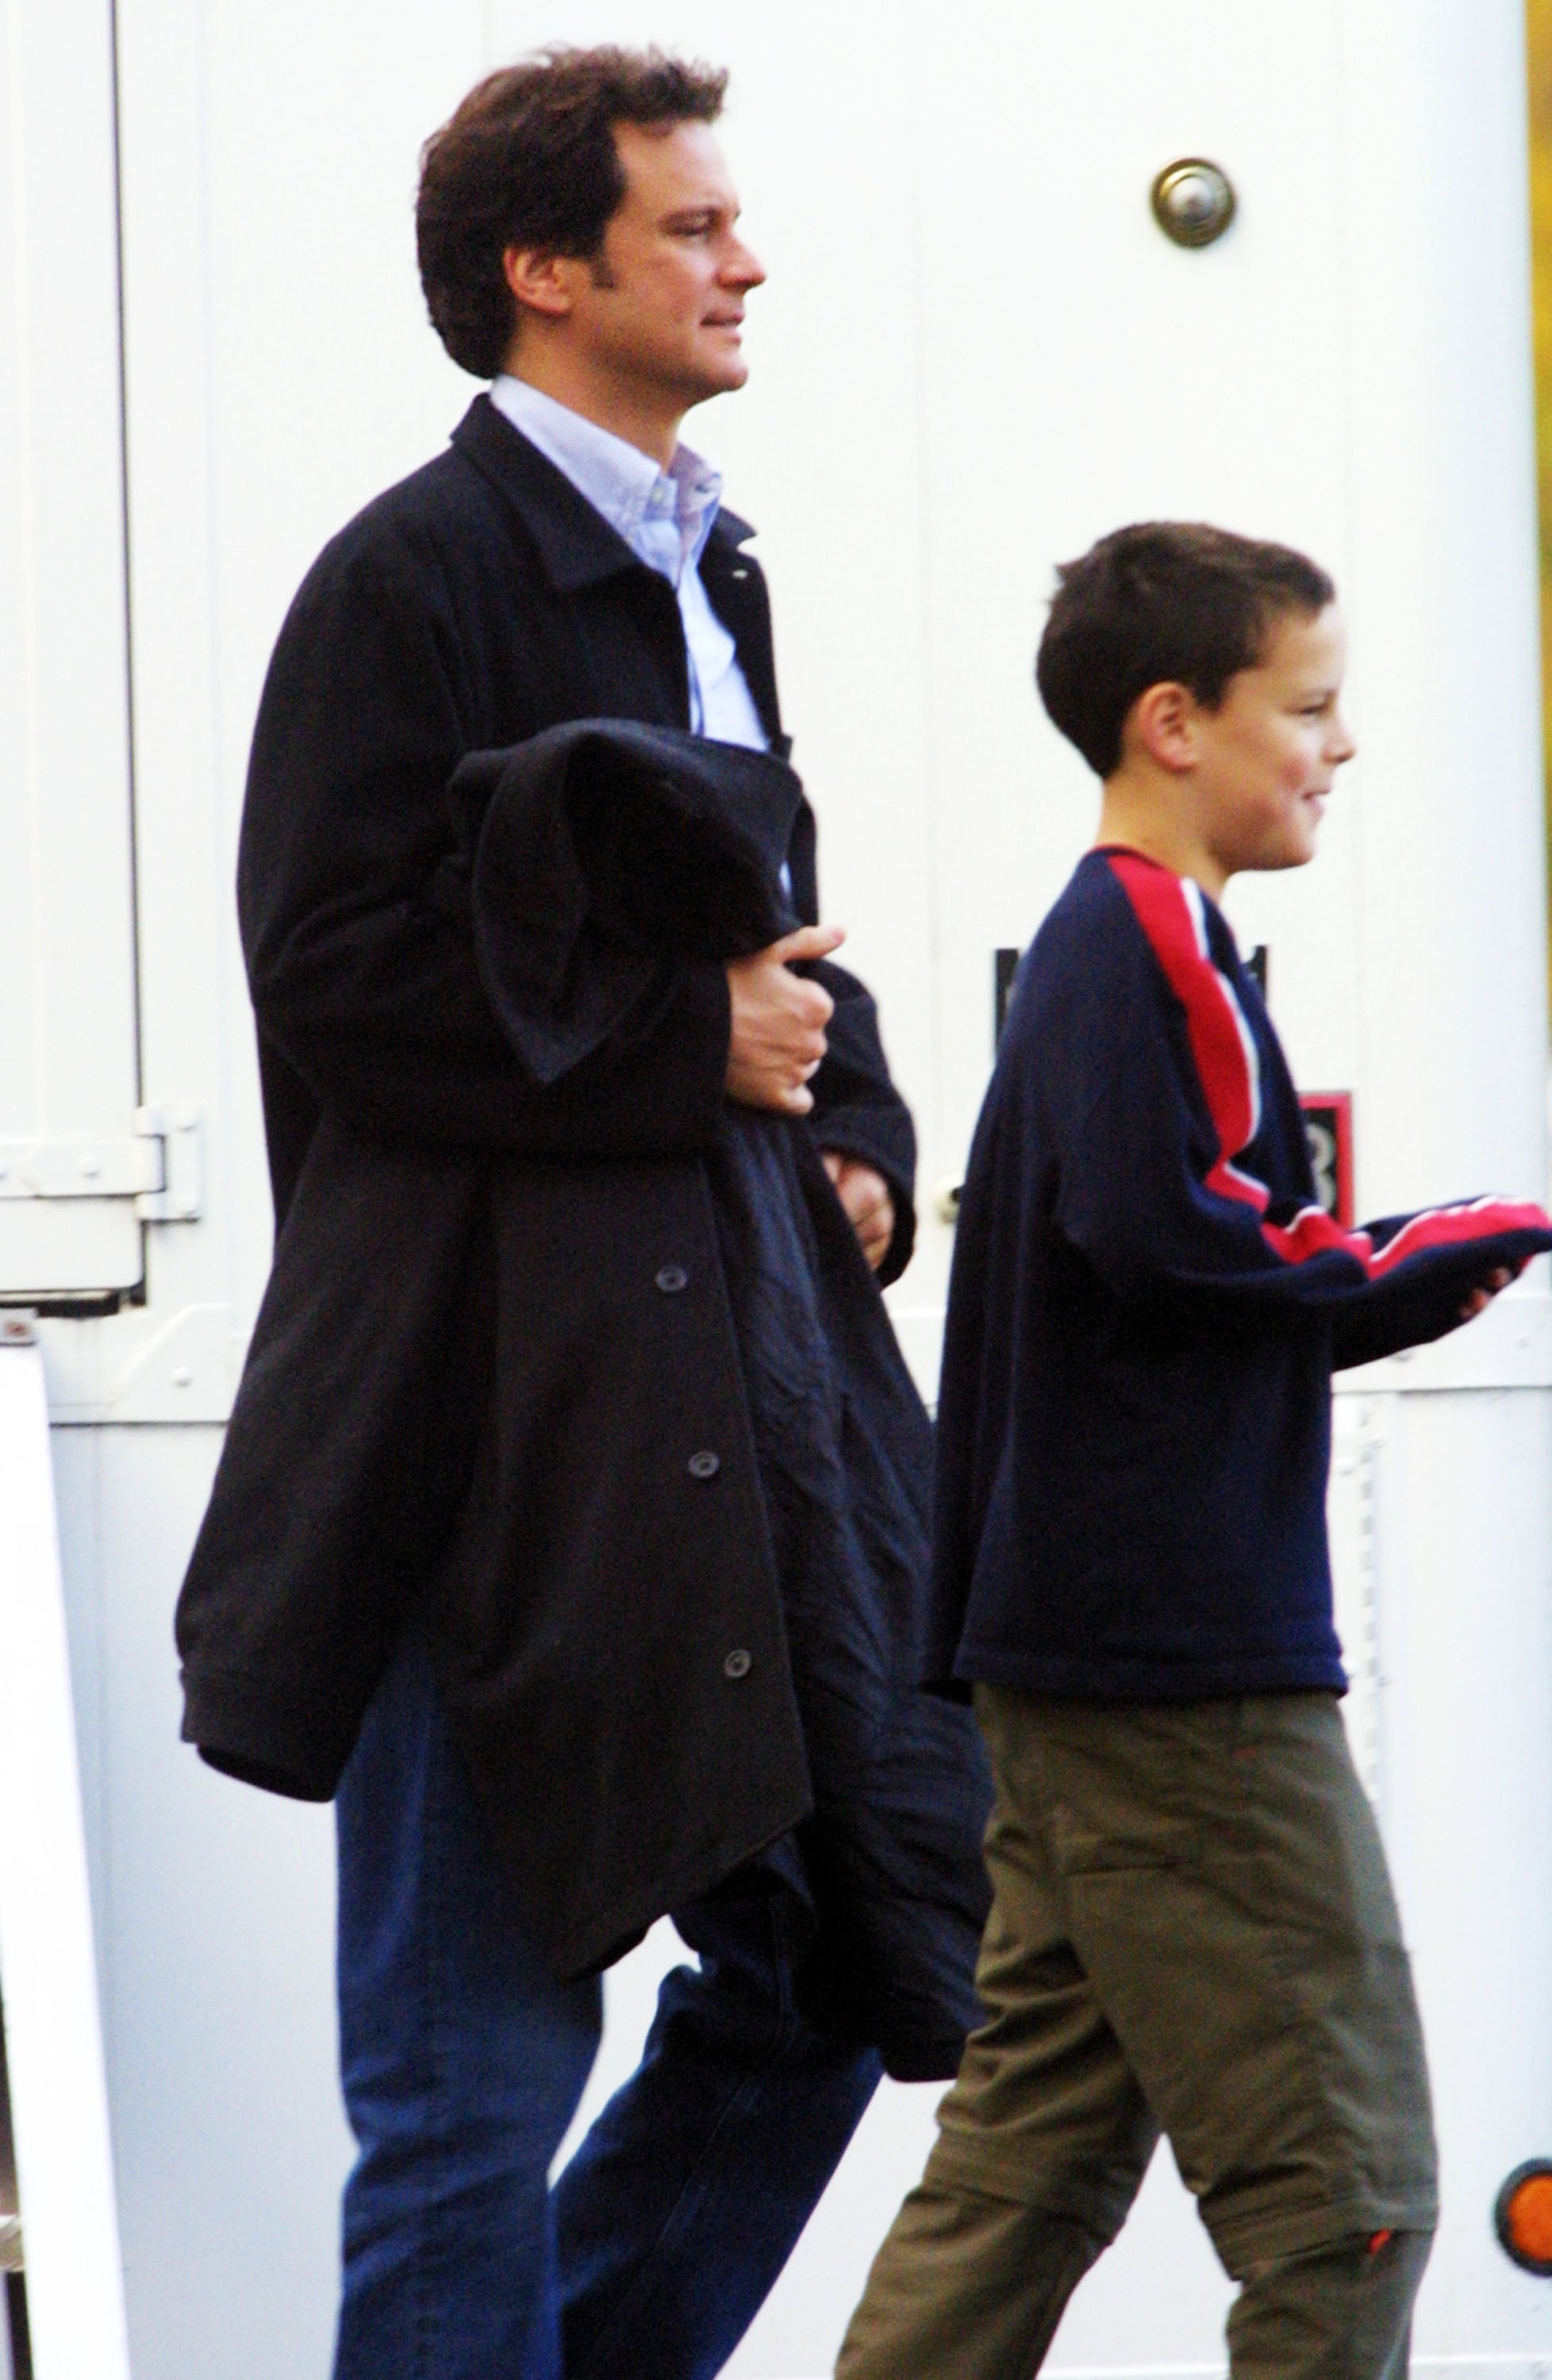 Colin Firth and his son Will Firth leave their trailer on the set of his film "New Cardiff" on November 26, 2001, in Vancouver, British Columbia. | Source: Getty Images